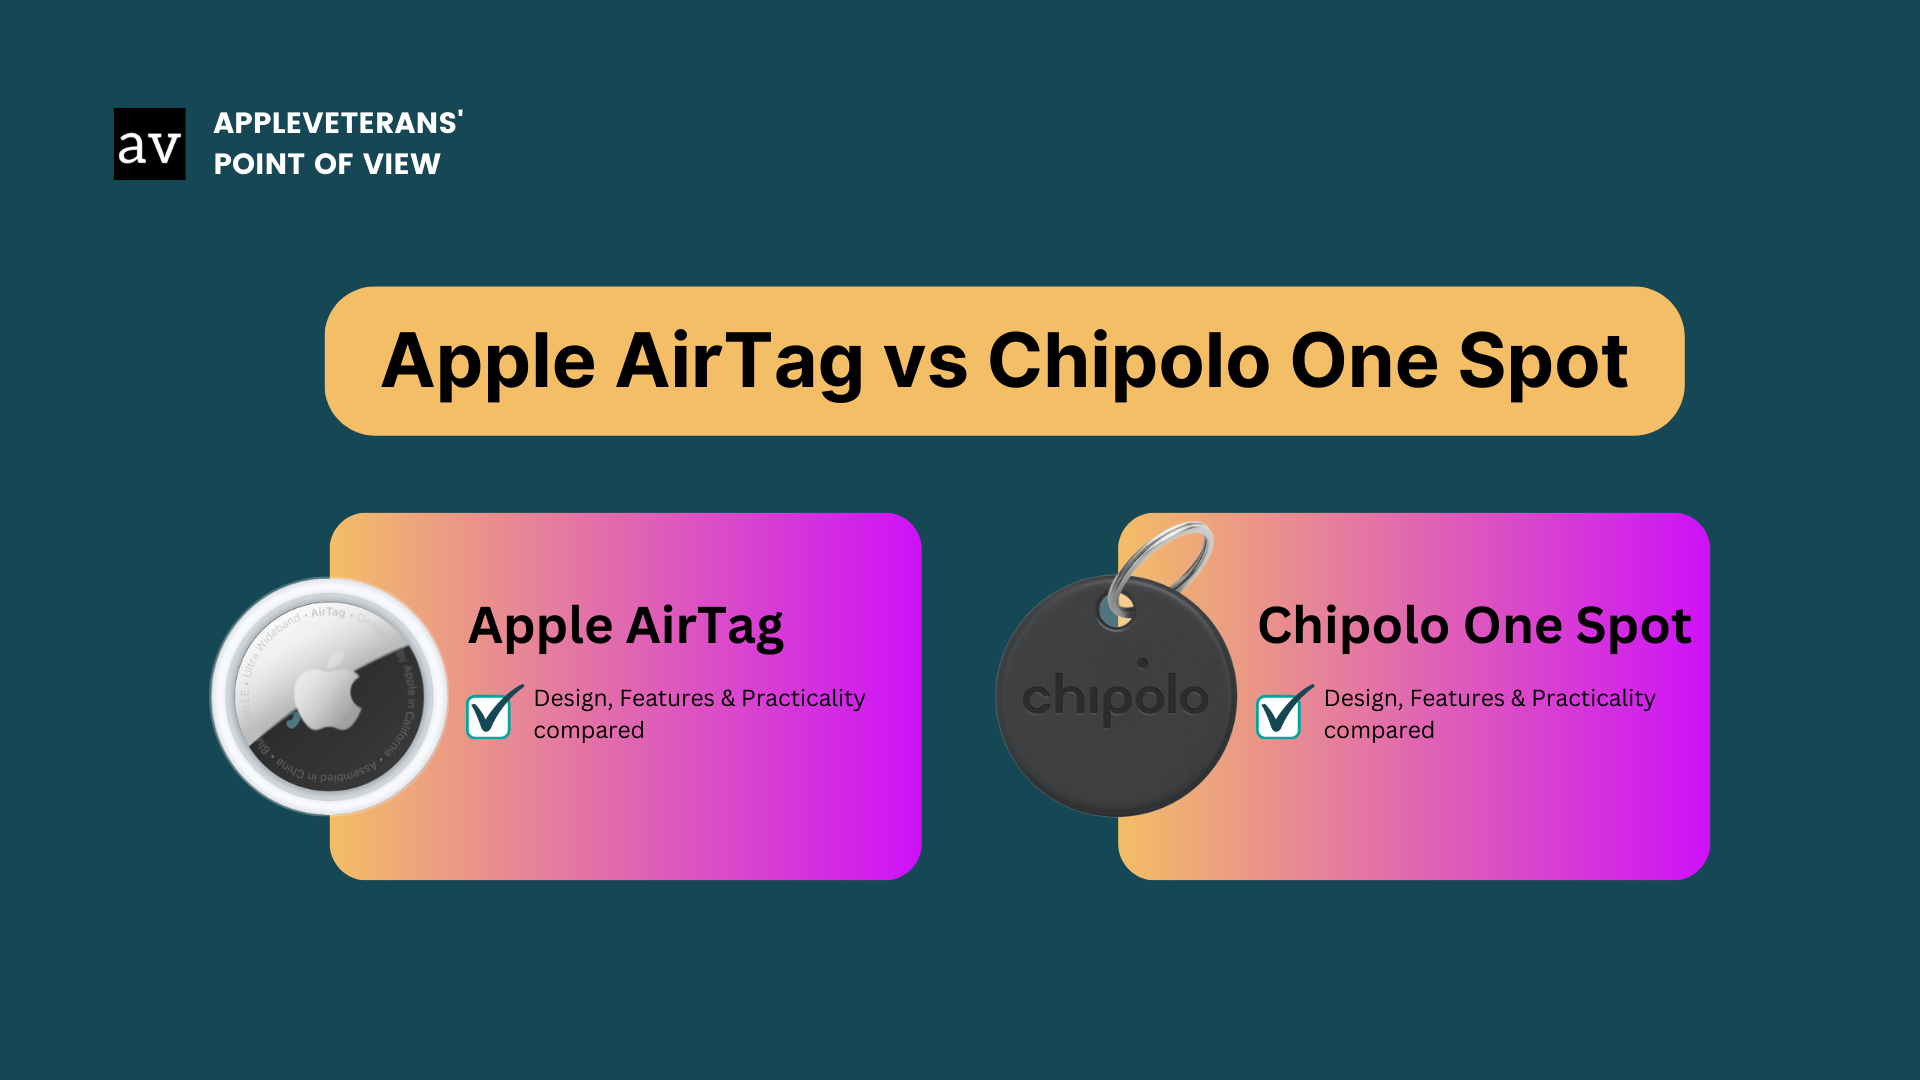 Chipolo One Spot Is A Better Tradeoff For Anyone Creeped Out By AirTags